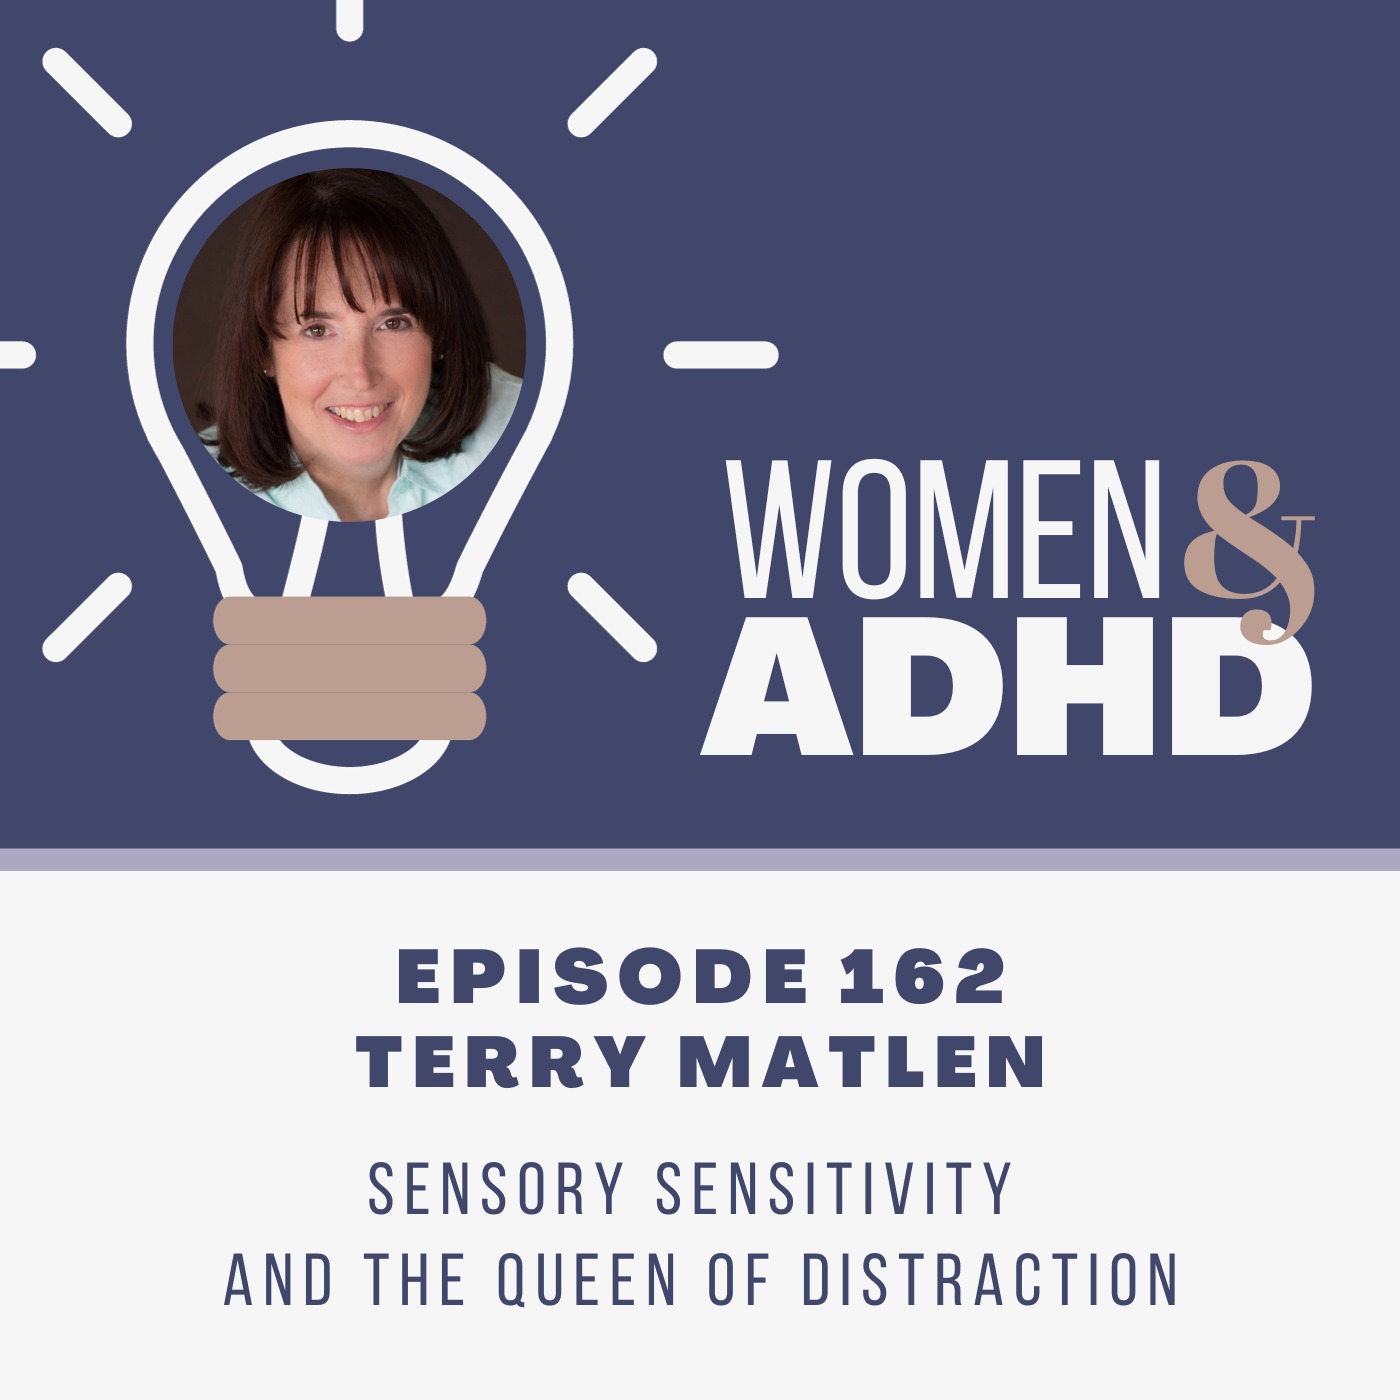 Terry Matlen: Sensory sensitivity and the queen of distraction